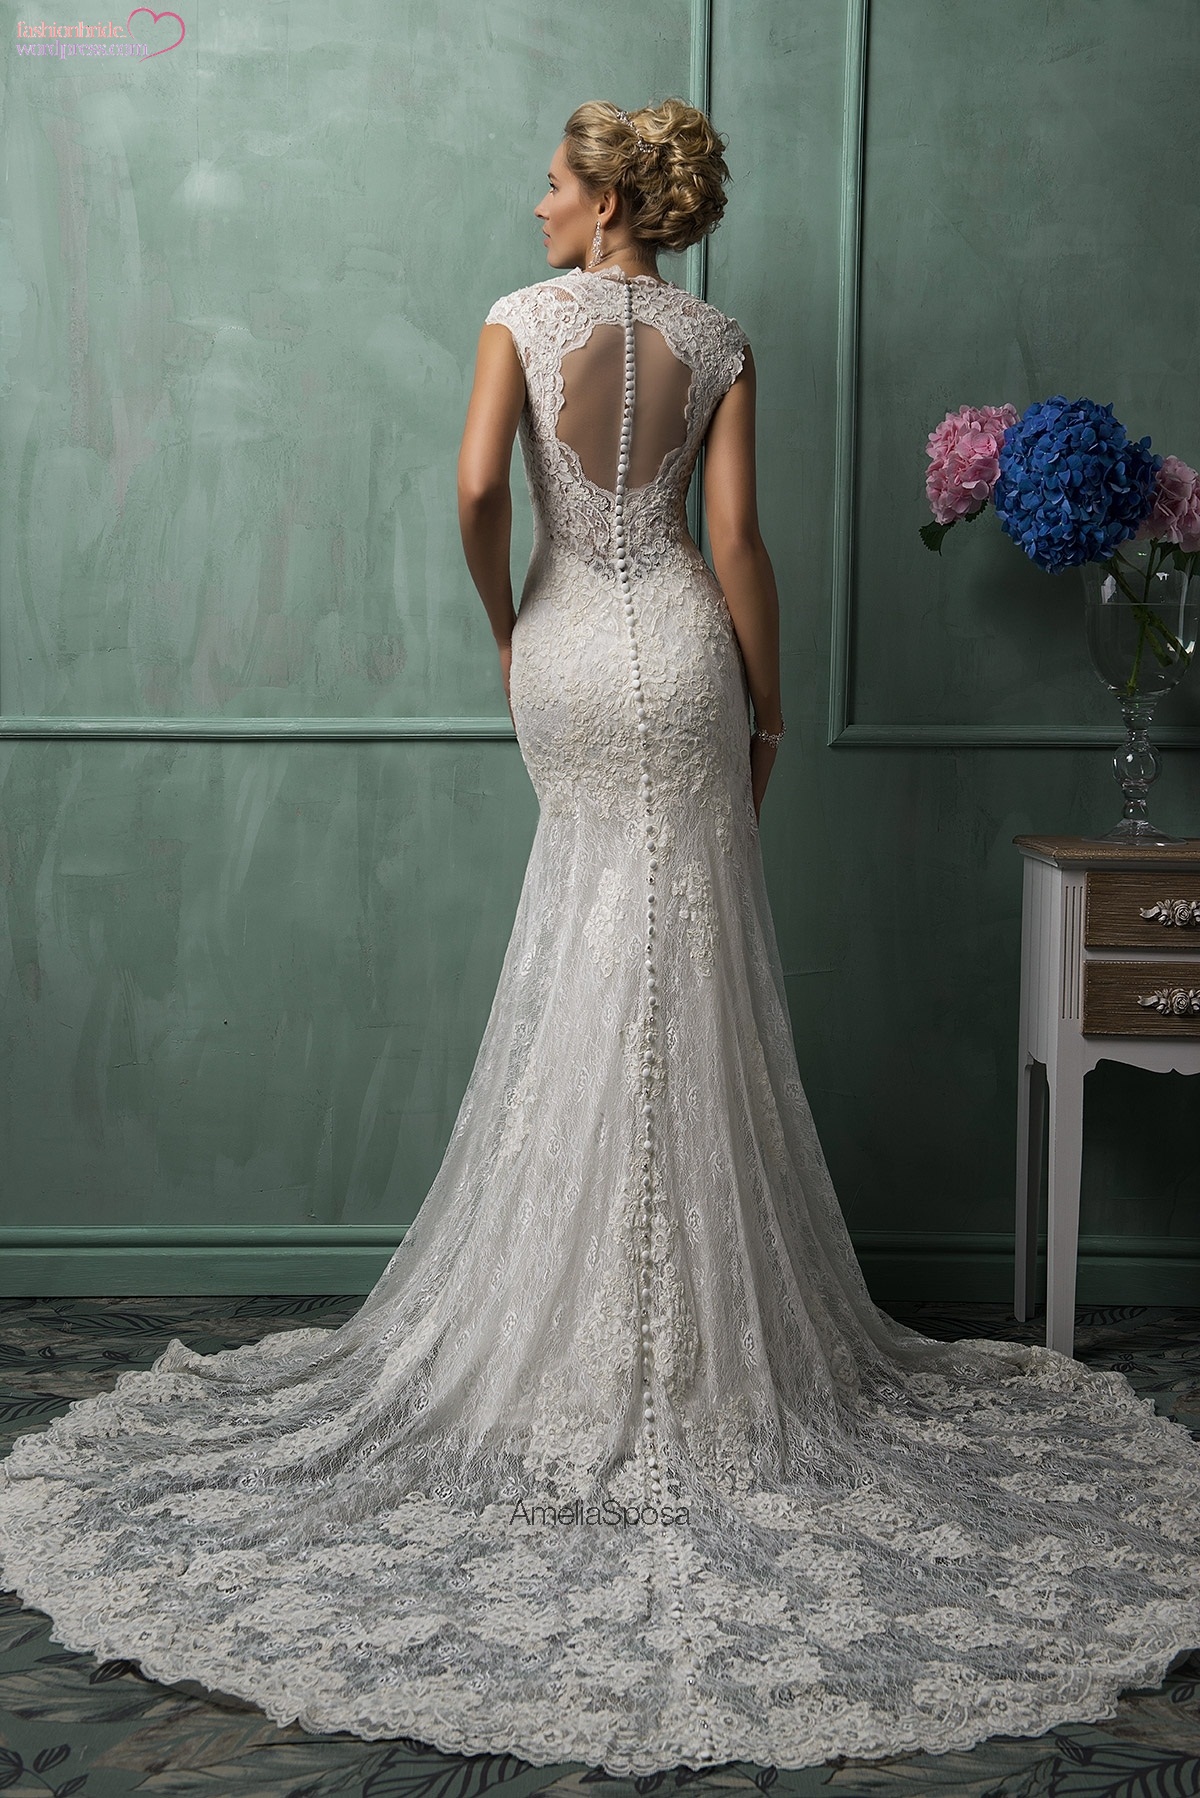 Amelia Sposa Spring 2014 Bridal Collection (I) The